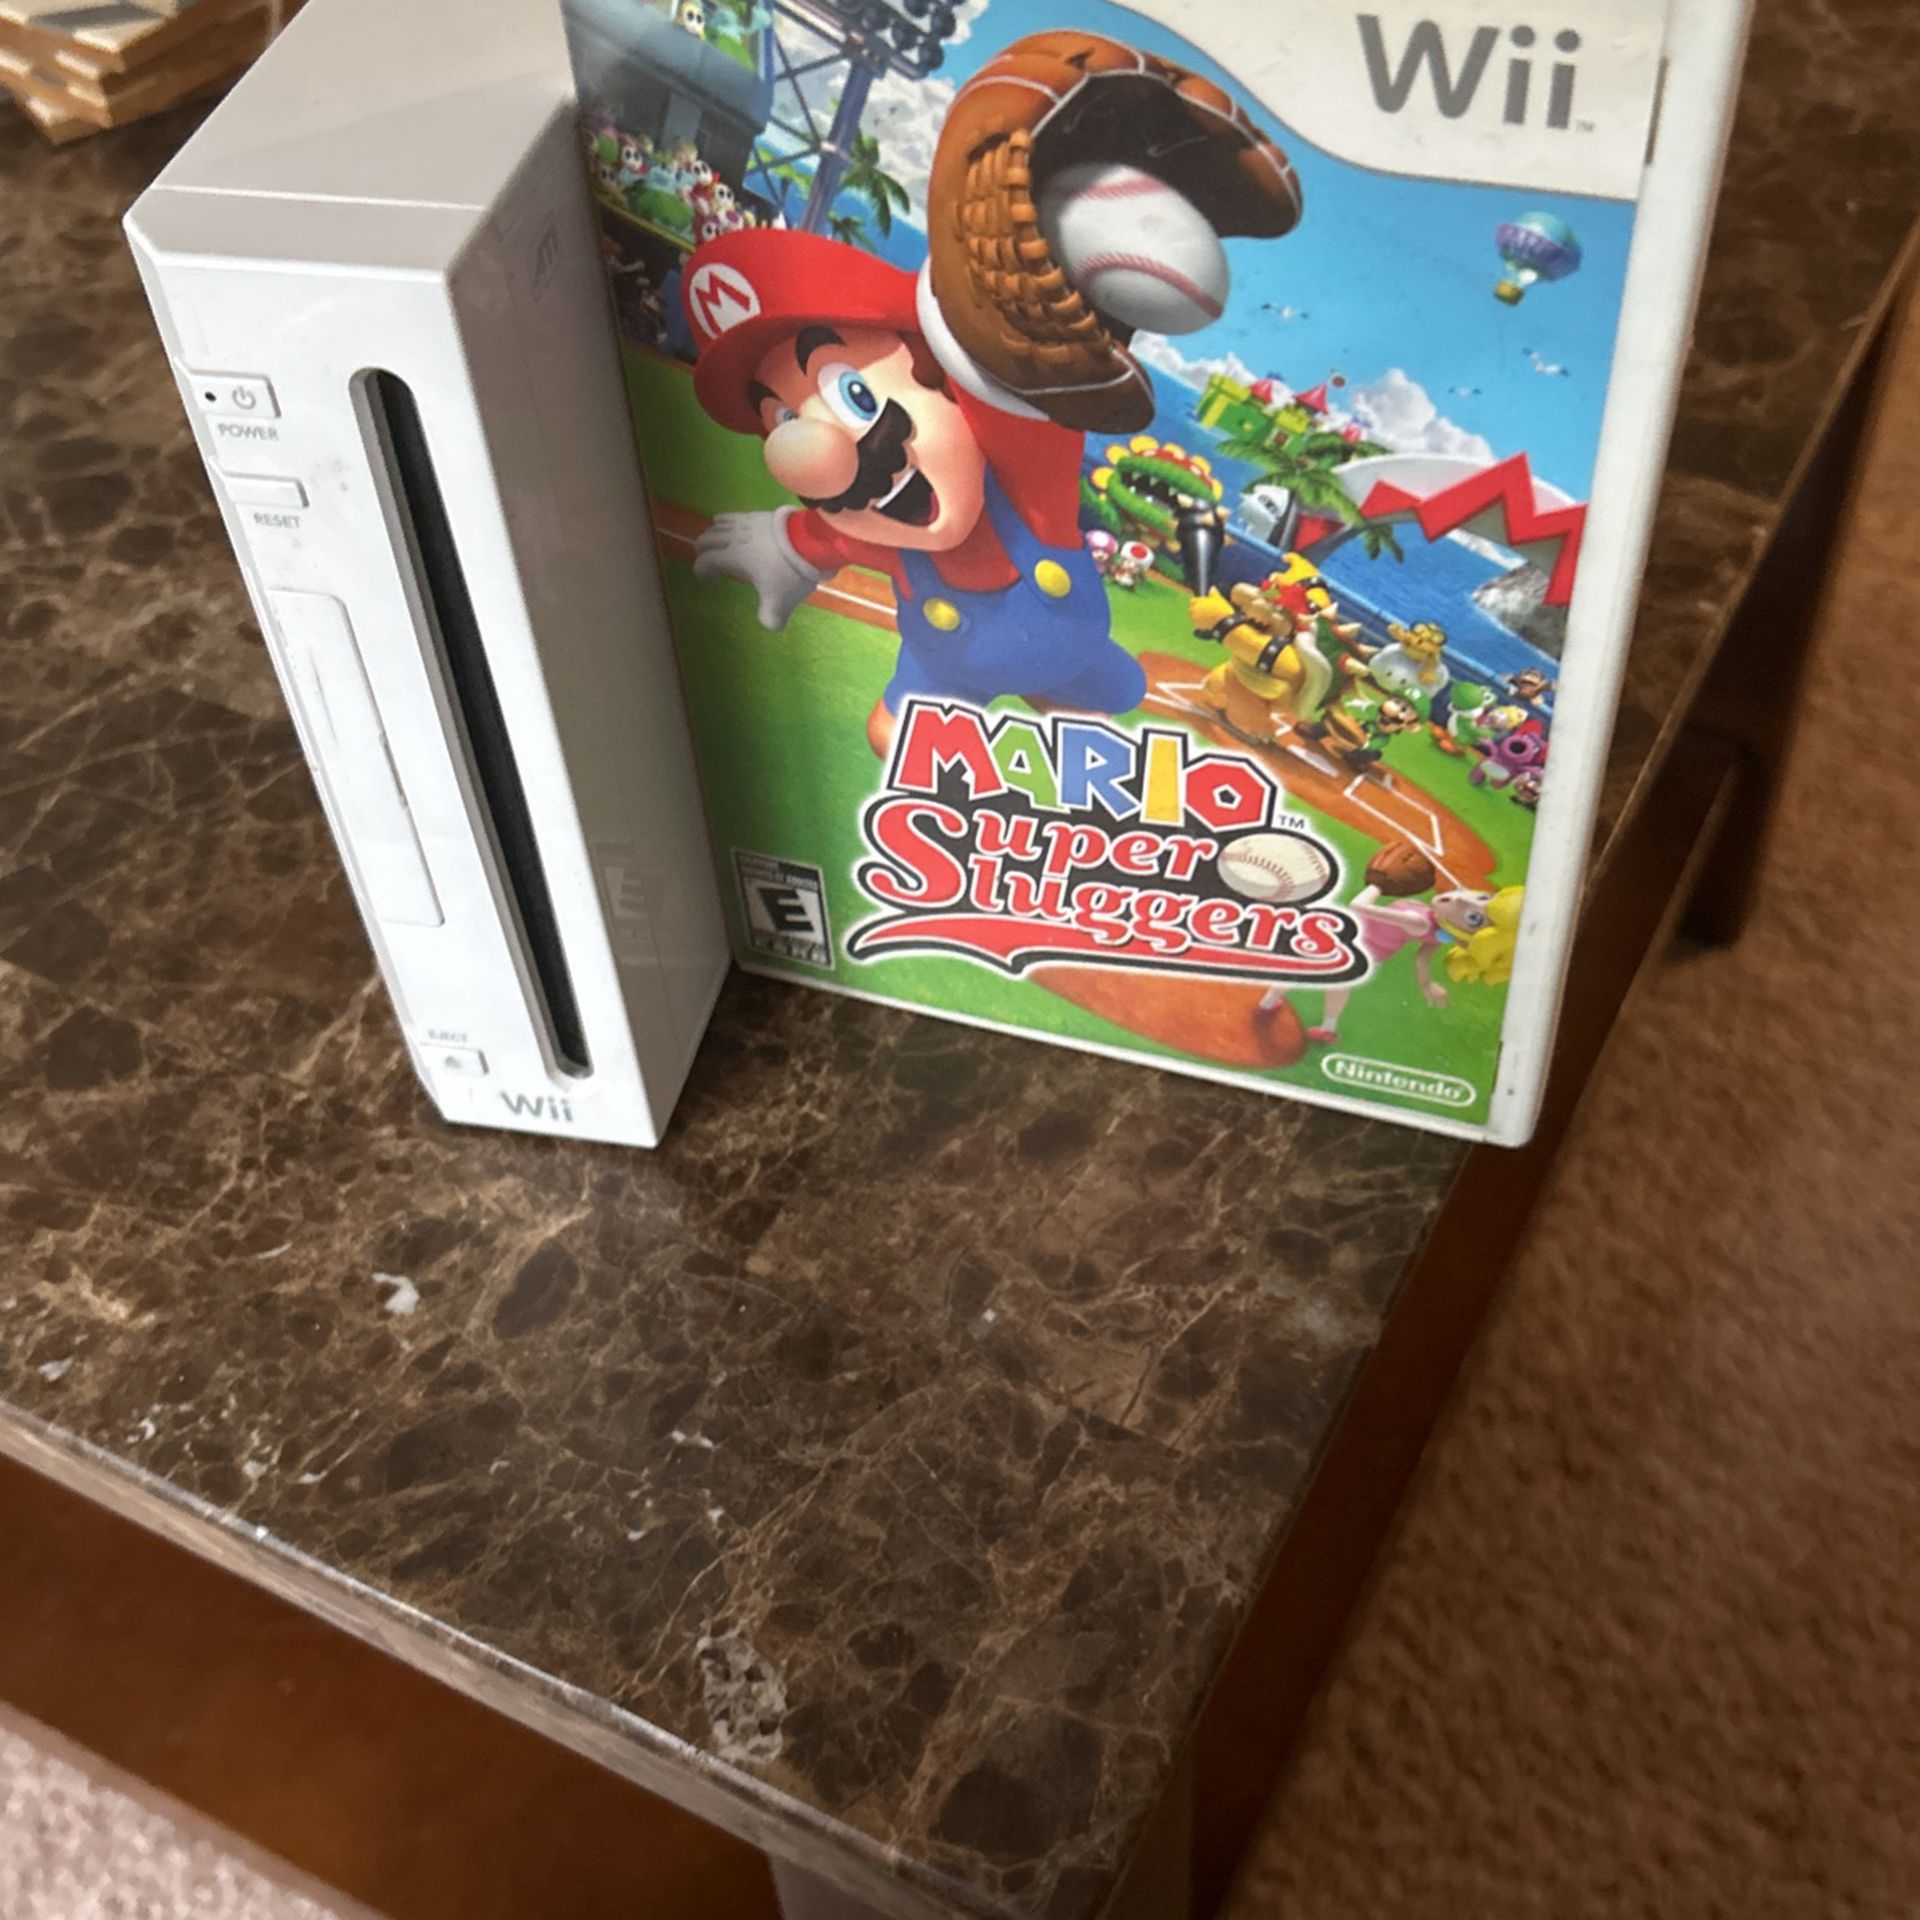 Nintendo Wii W/ Mario Super Sluggers (includes All Cables And Controllers)